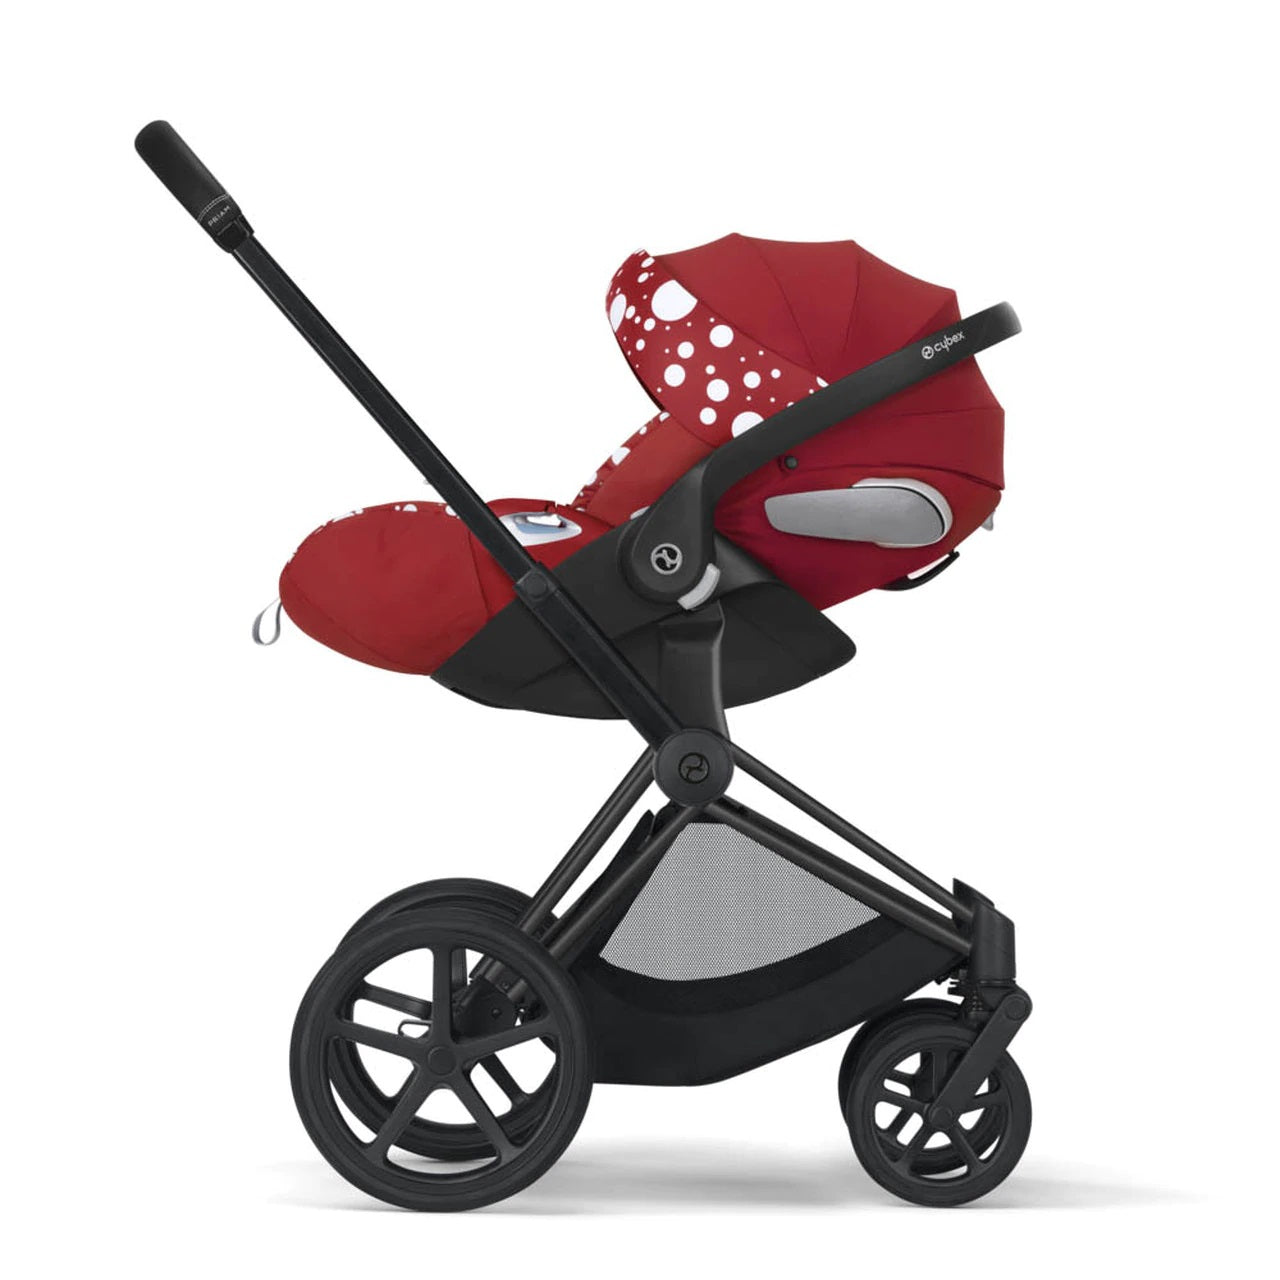 Cybex Priam Travel System with Lux Carrycot - Petticoat